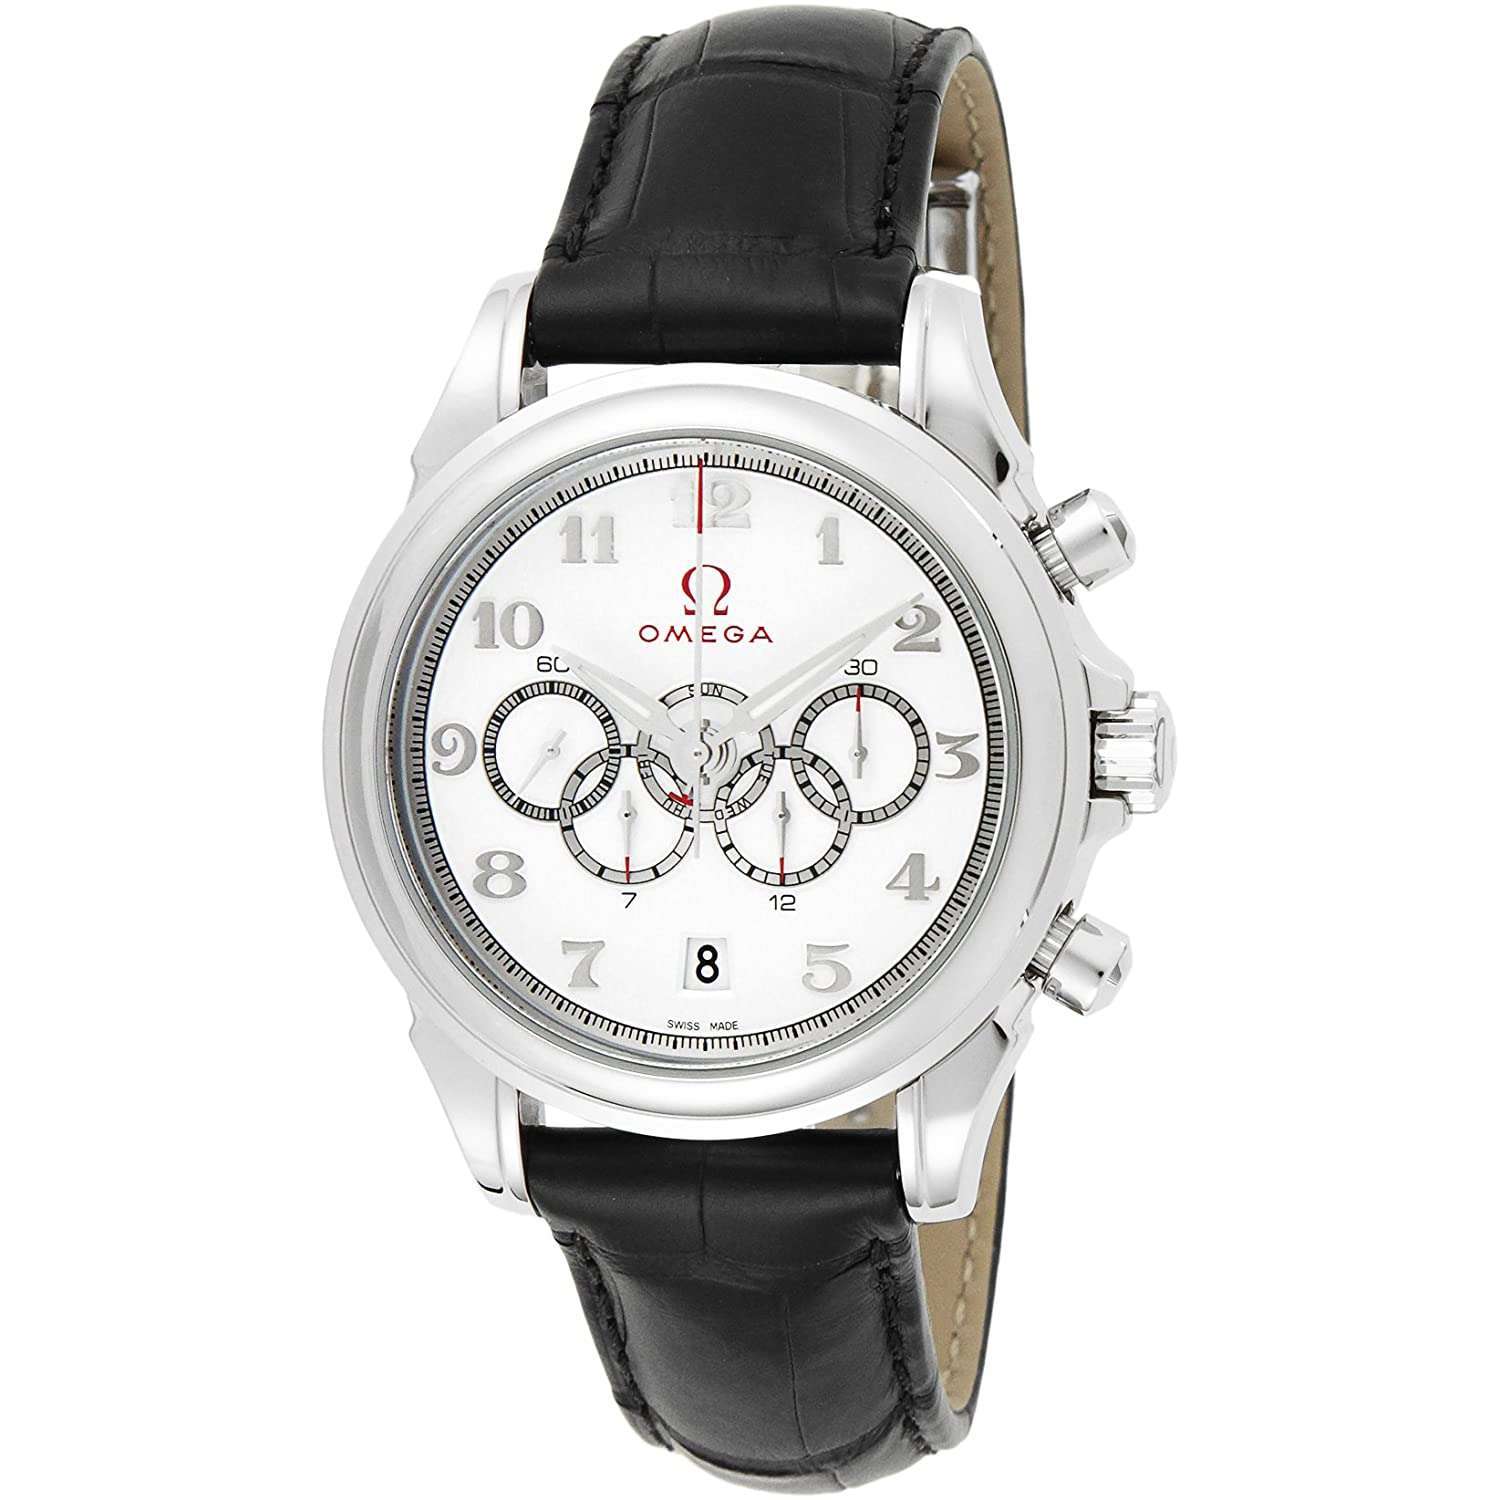 OMEGA DE VILLE SPECIALITIES OLYMPIC GAMES 43 MM MEN WATCH (LIMITED EDITION) 422.13.41.52.04.001 - ROOK JAPAN